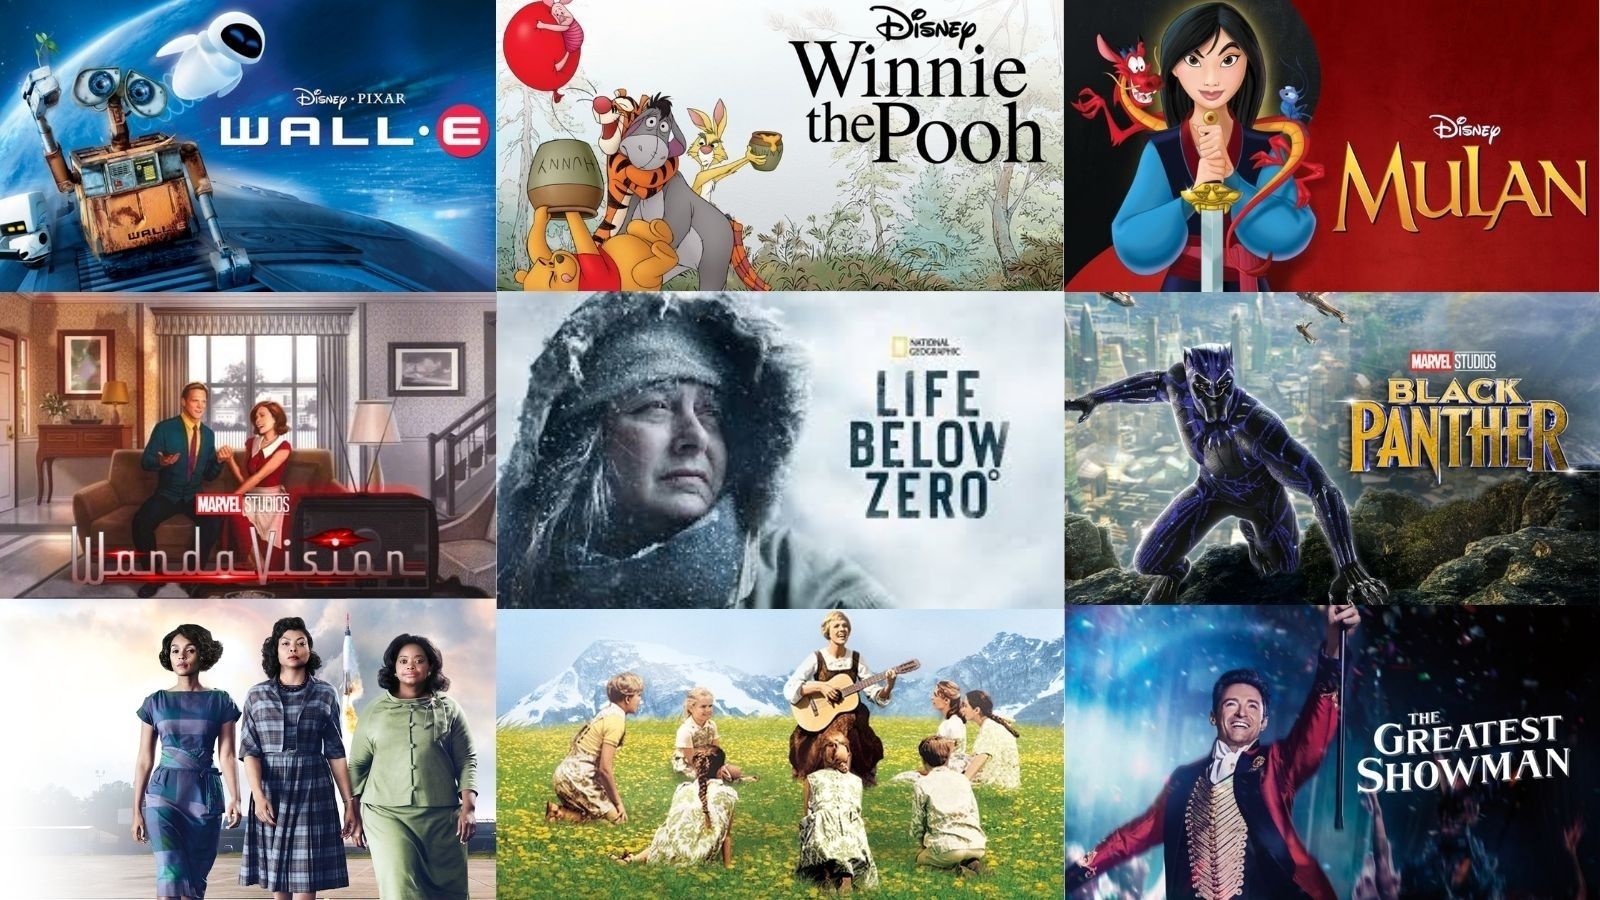 Movies on Disney Plus Singapore to spark that flame of kindness in you